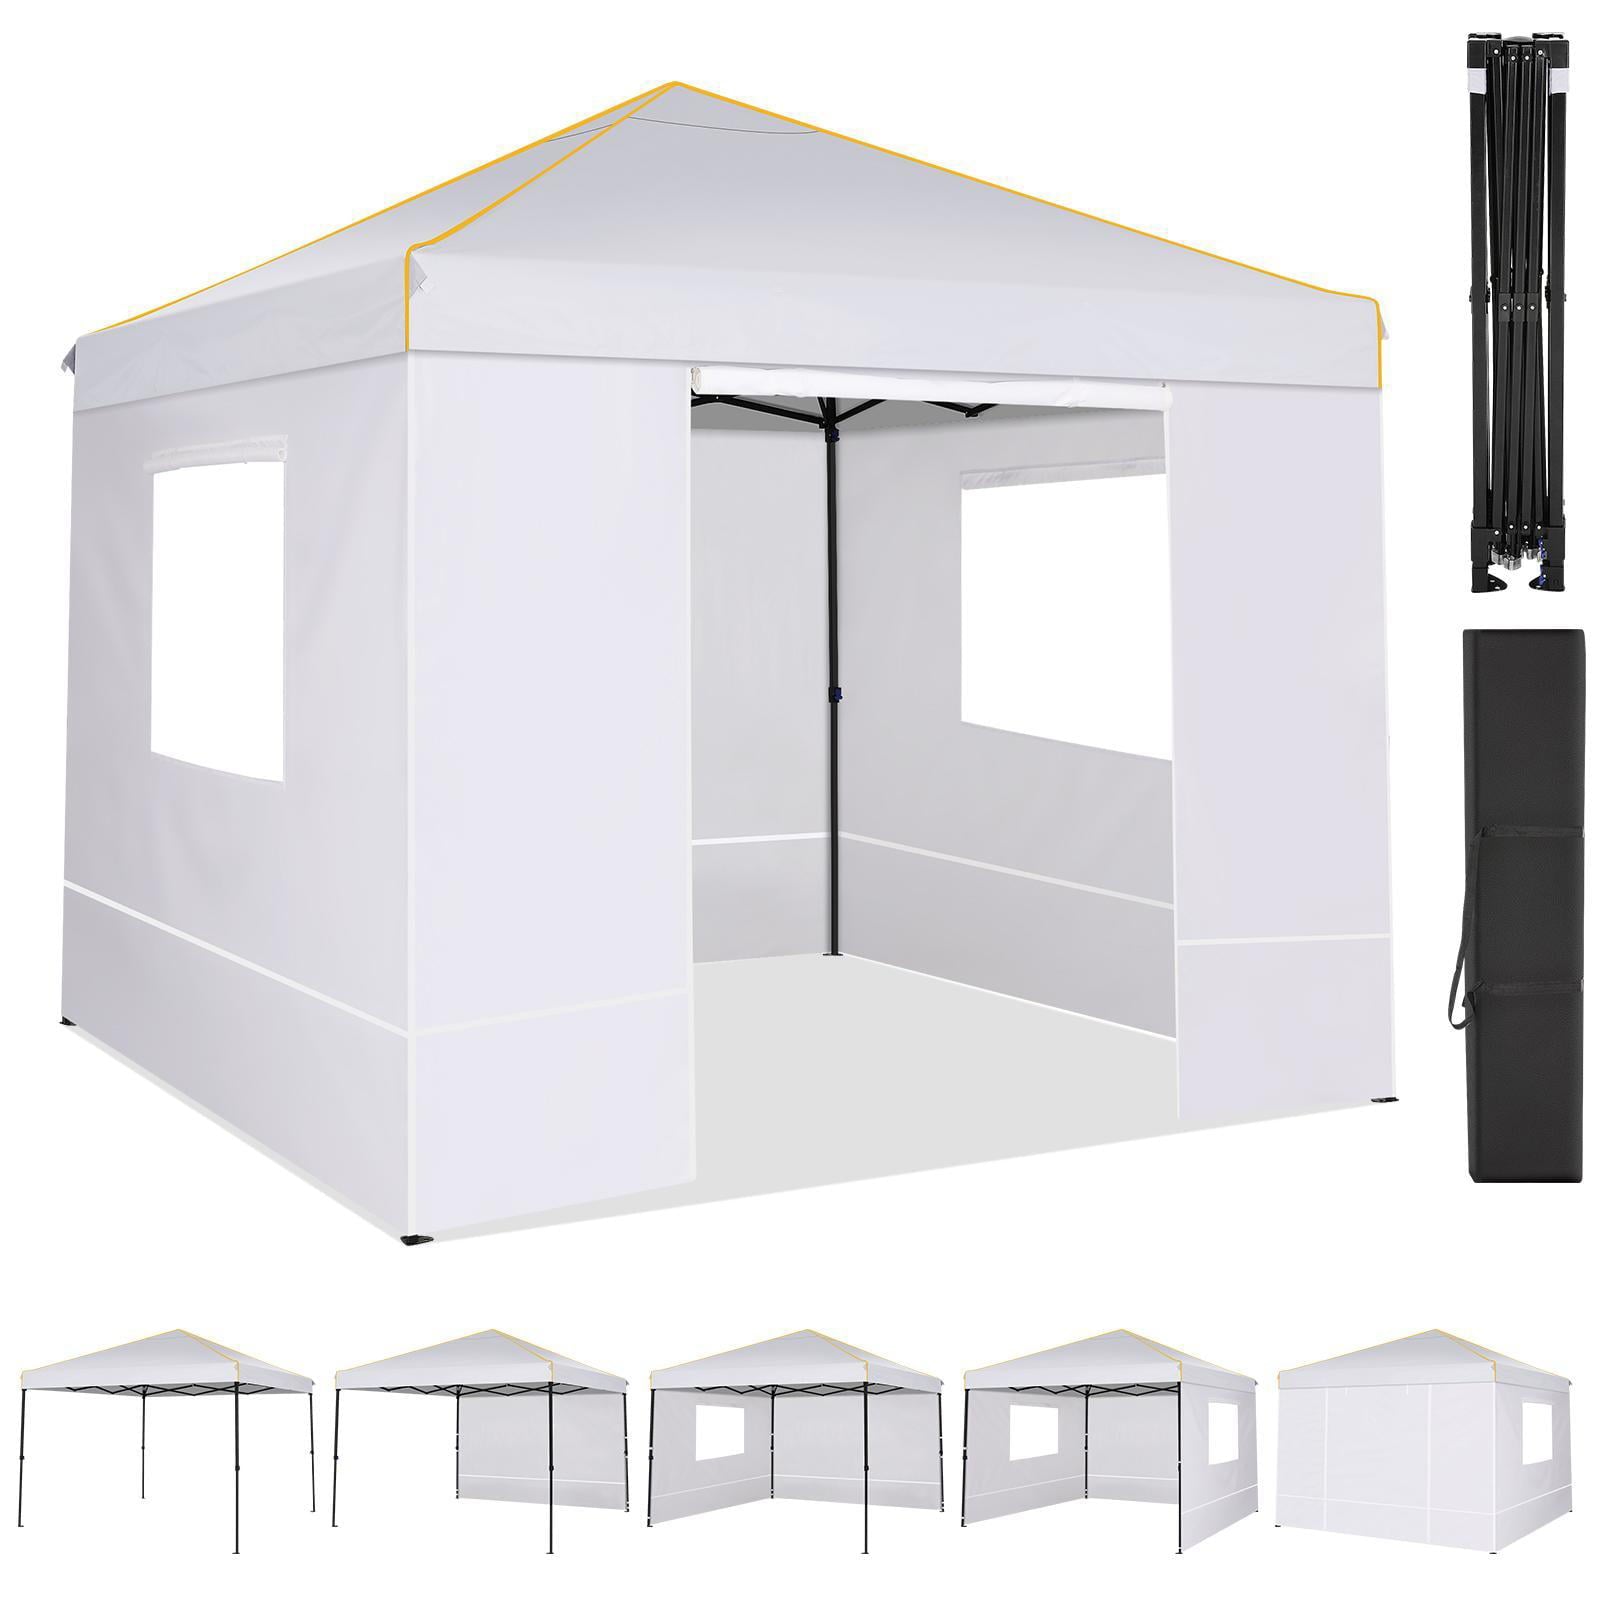 Likein 10x10 Ft Outdoor Canopy Tent, Pop up Tents Easy Setup Portable Shade Instant Folding with Carrying Bag and Height Adjustable and 4 Sidewalls, Clearance Sale - Gray